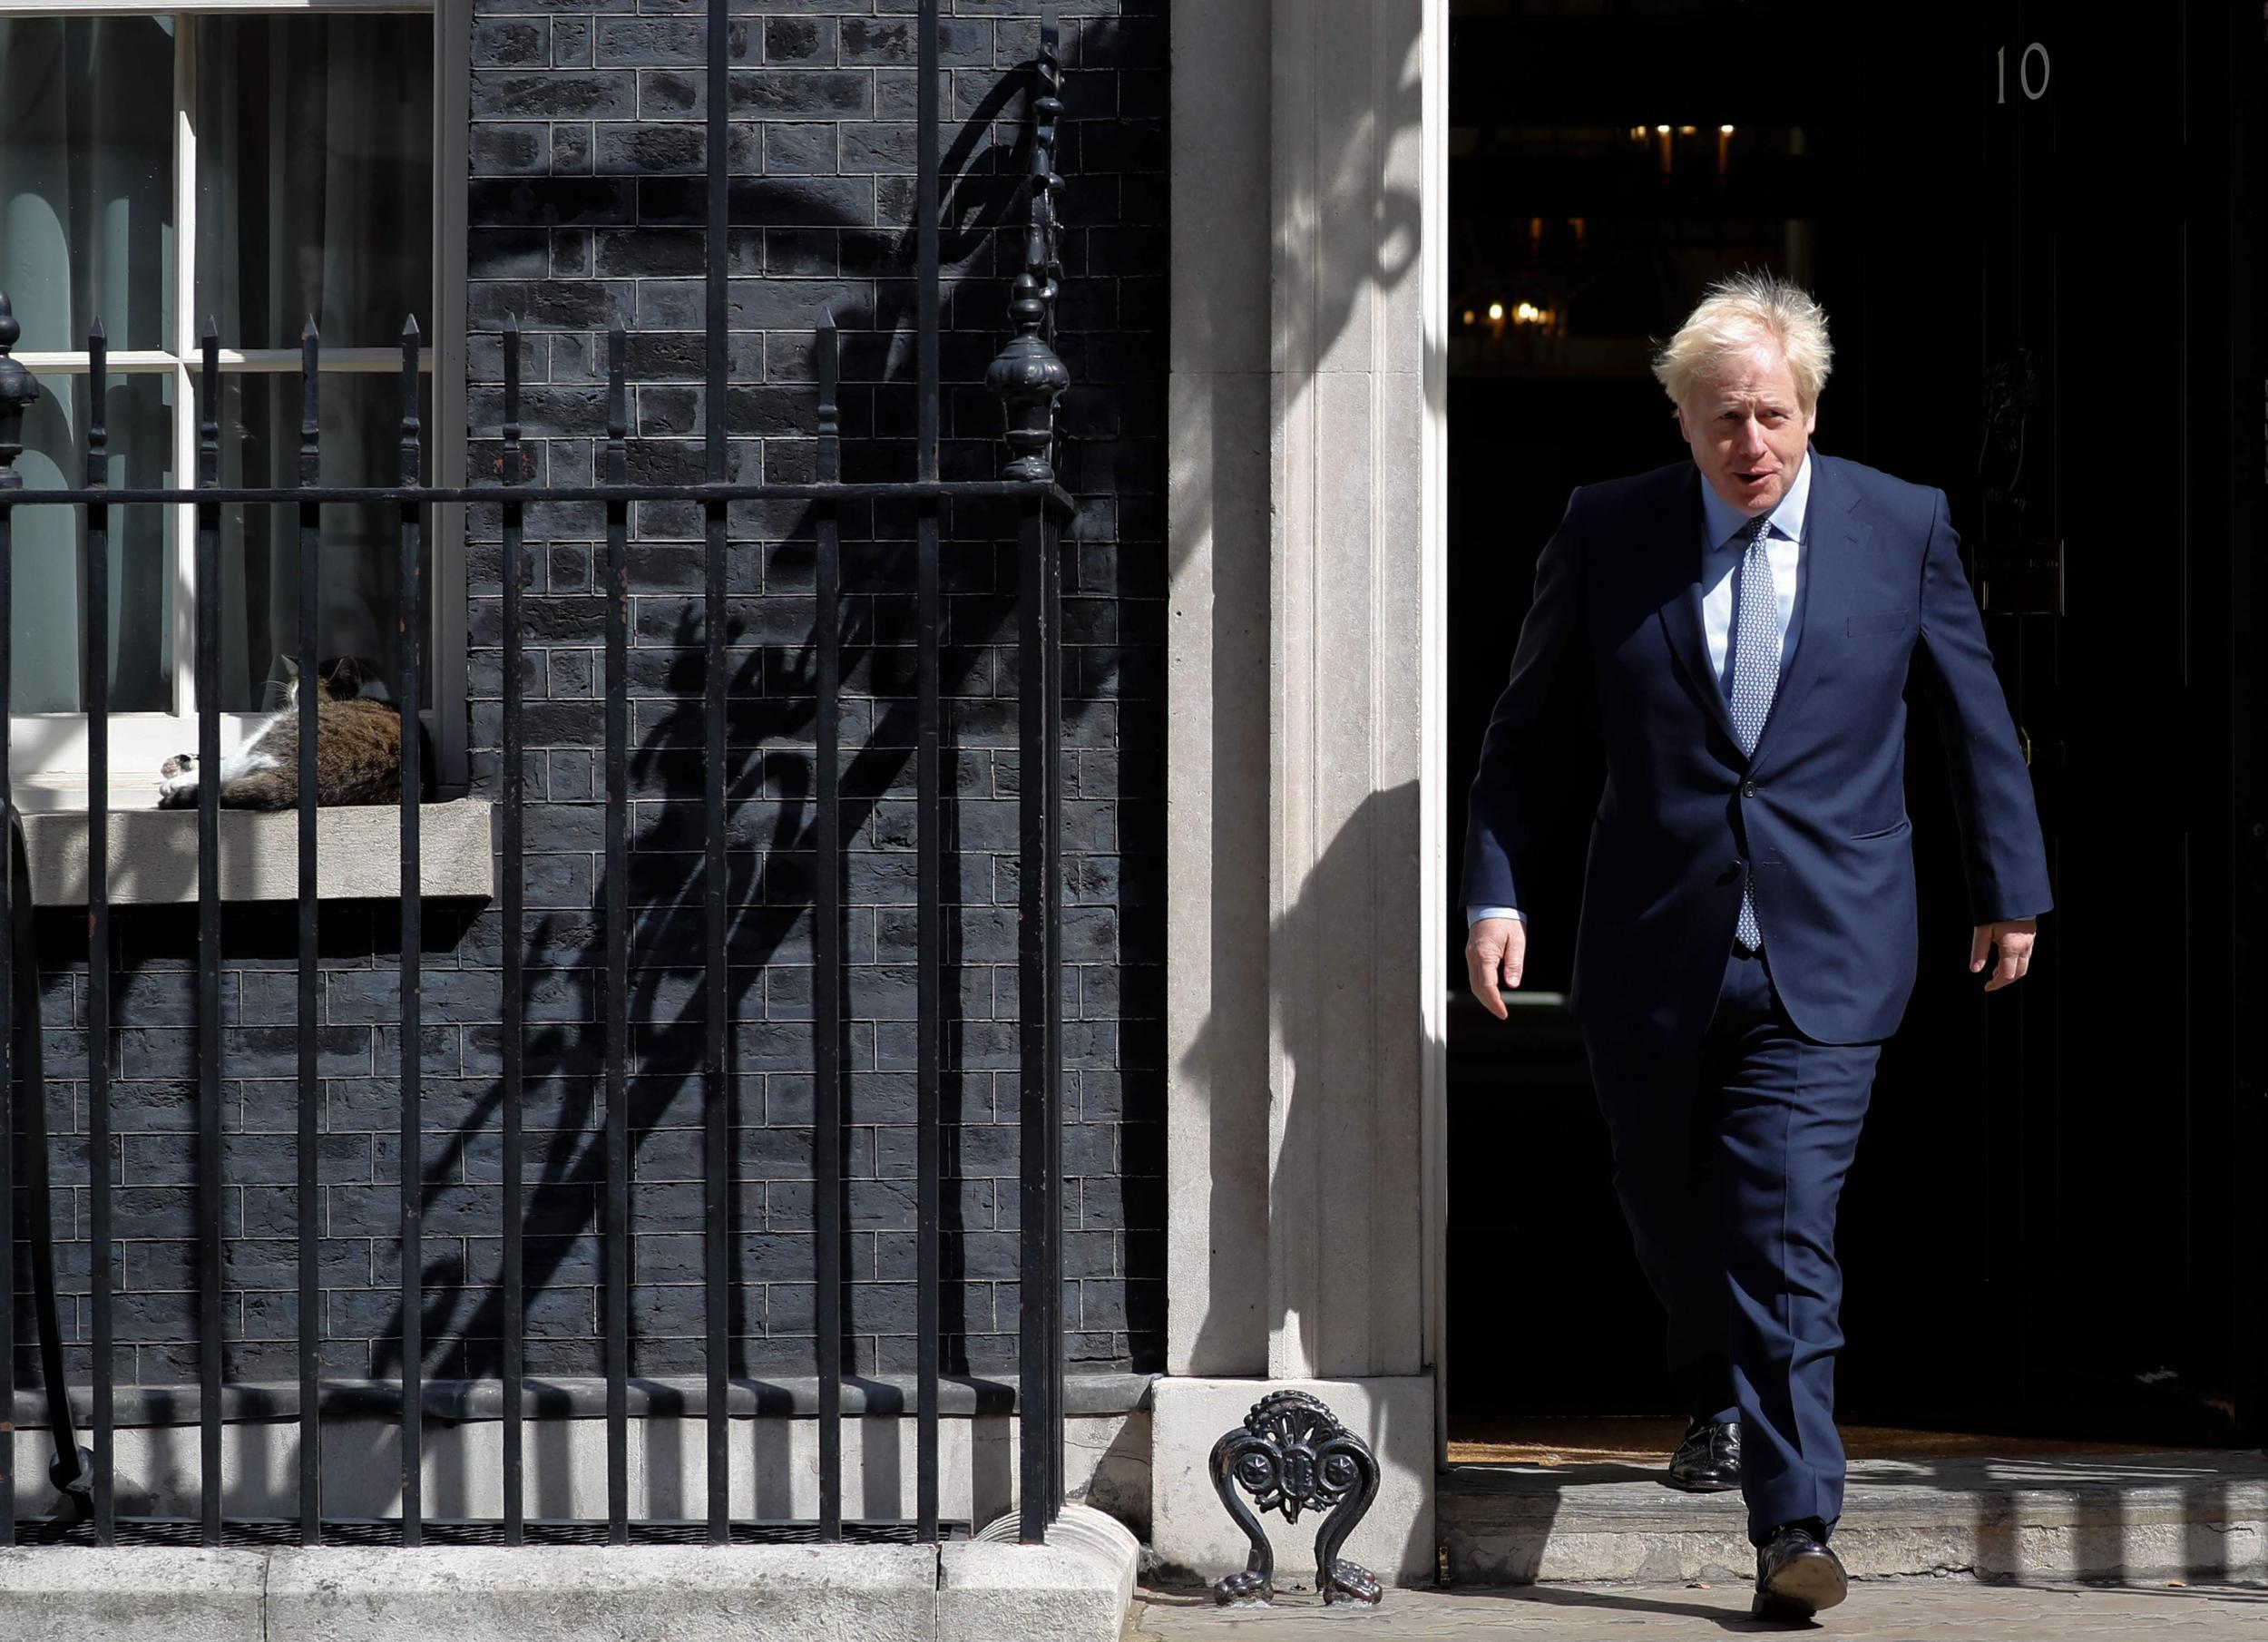 EU withdrawal is the battleground on which Johnson will want to fight Corbyn